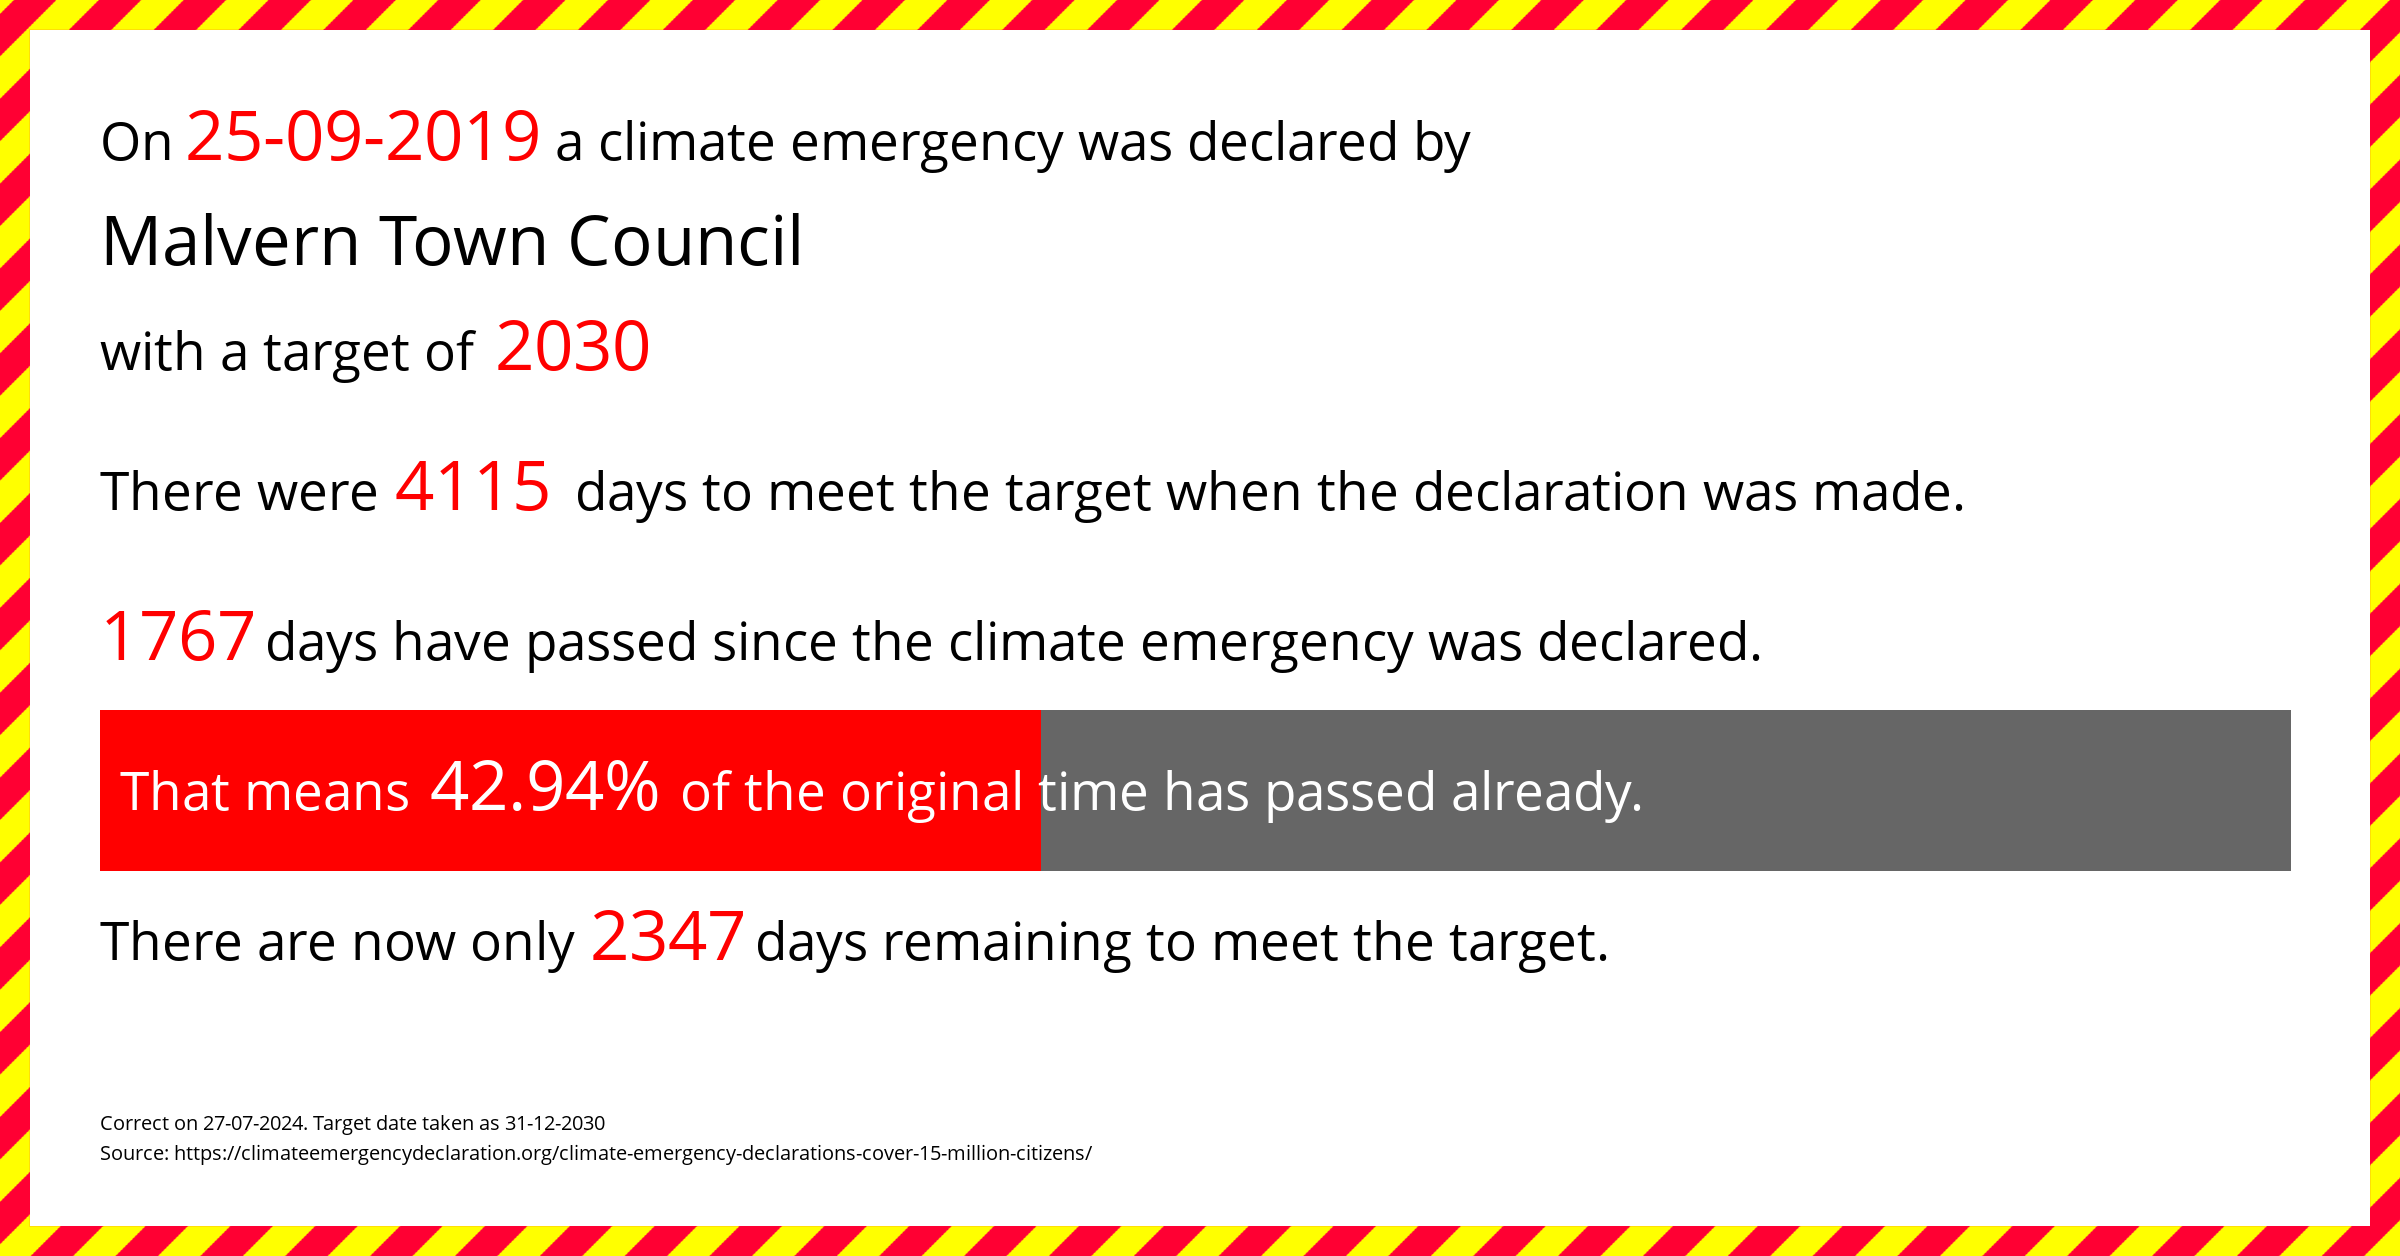 Malvern Town Council declared a Climate emergency on Wednesday 25th September 2019, with a target of 2030.